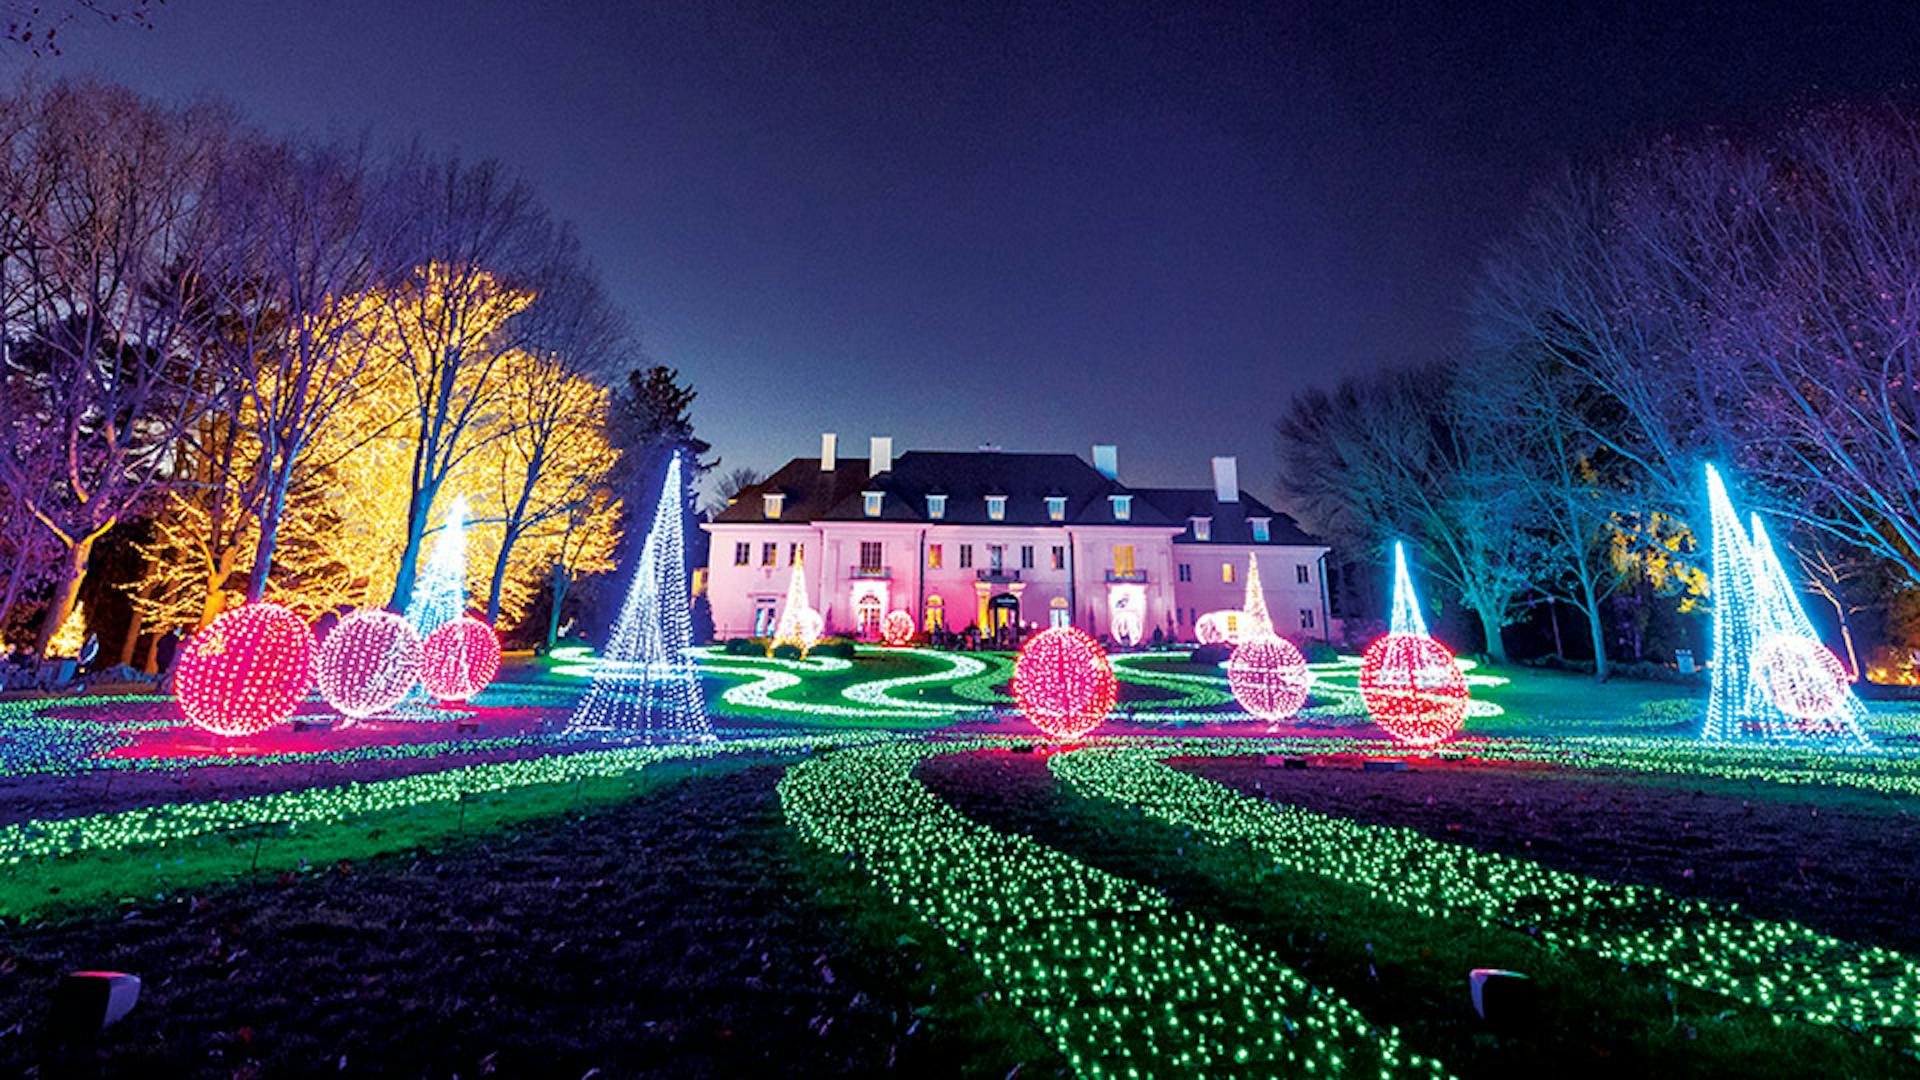 Illuminated trees, garden and mansion at Winterlights at Newfields in Indianapolis, Indiana (photo courtesy of Newfields)